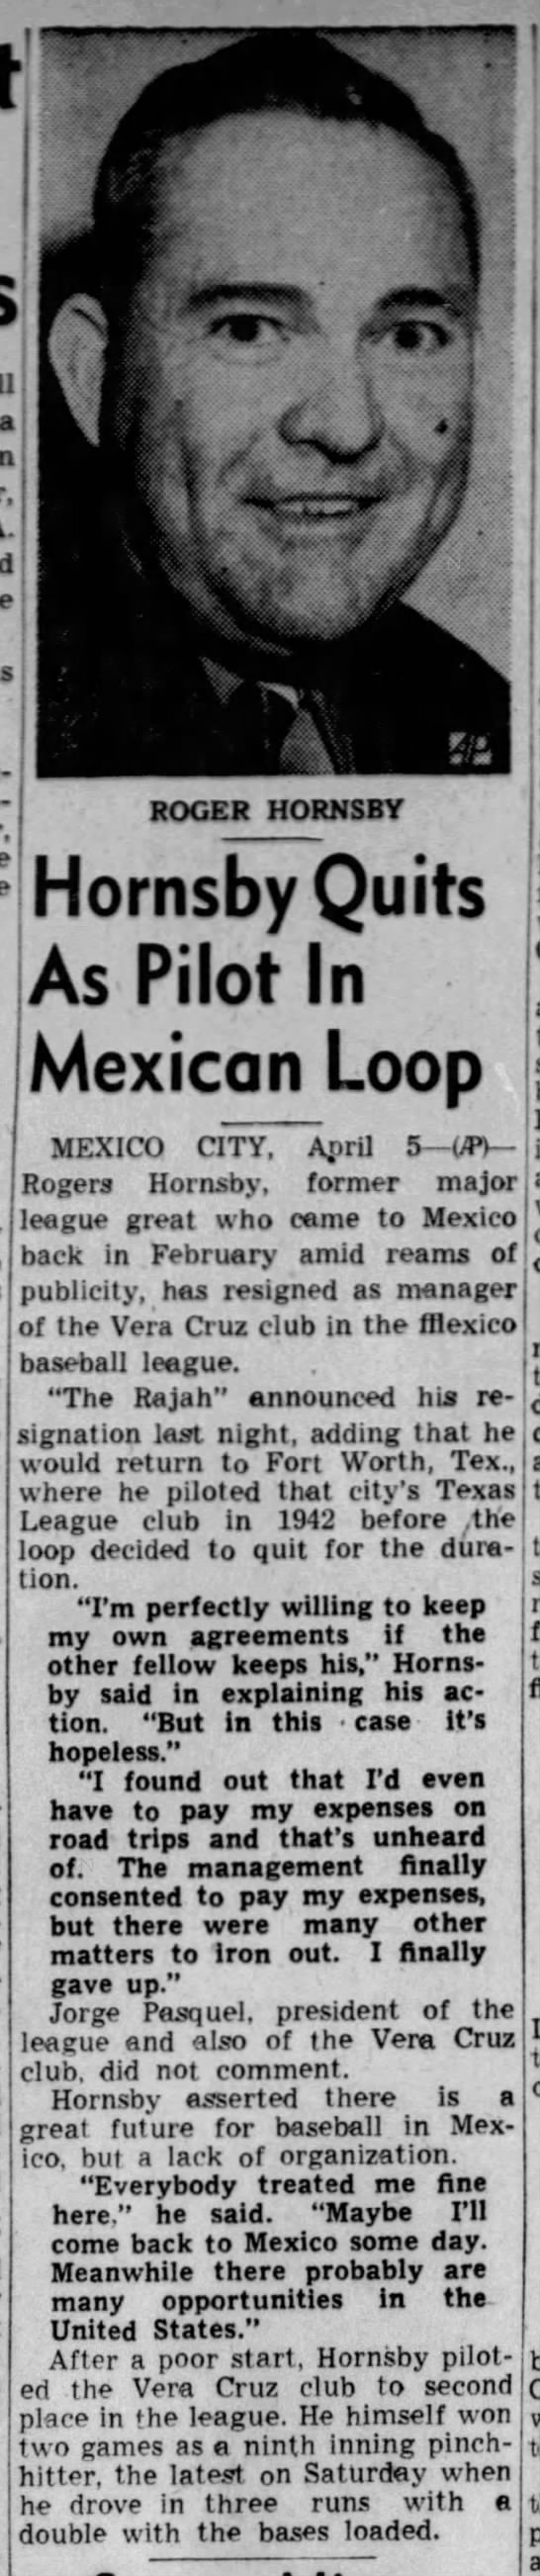 Rogers Hornsby Quits as Pilot in Mexican Loop - 